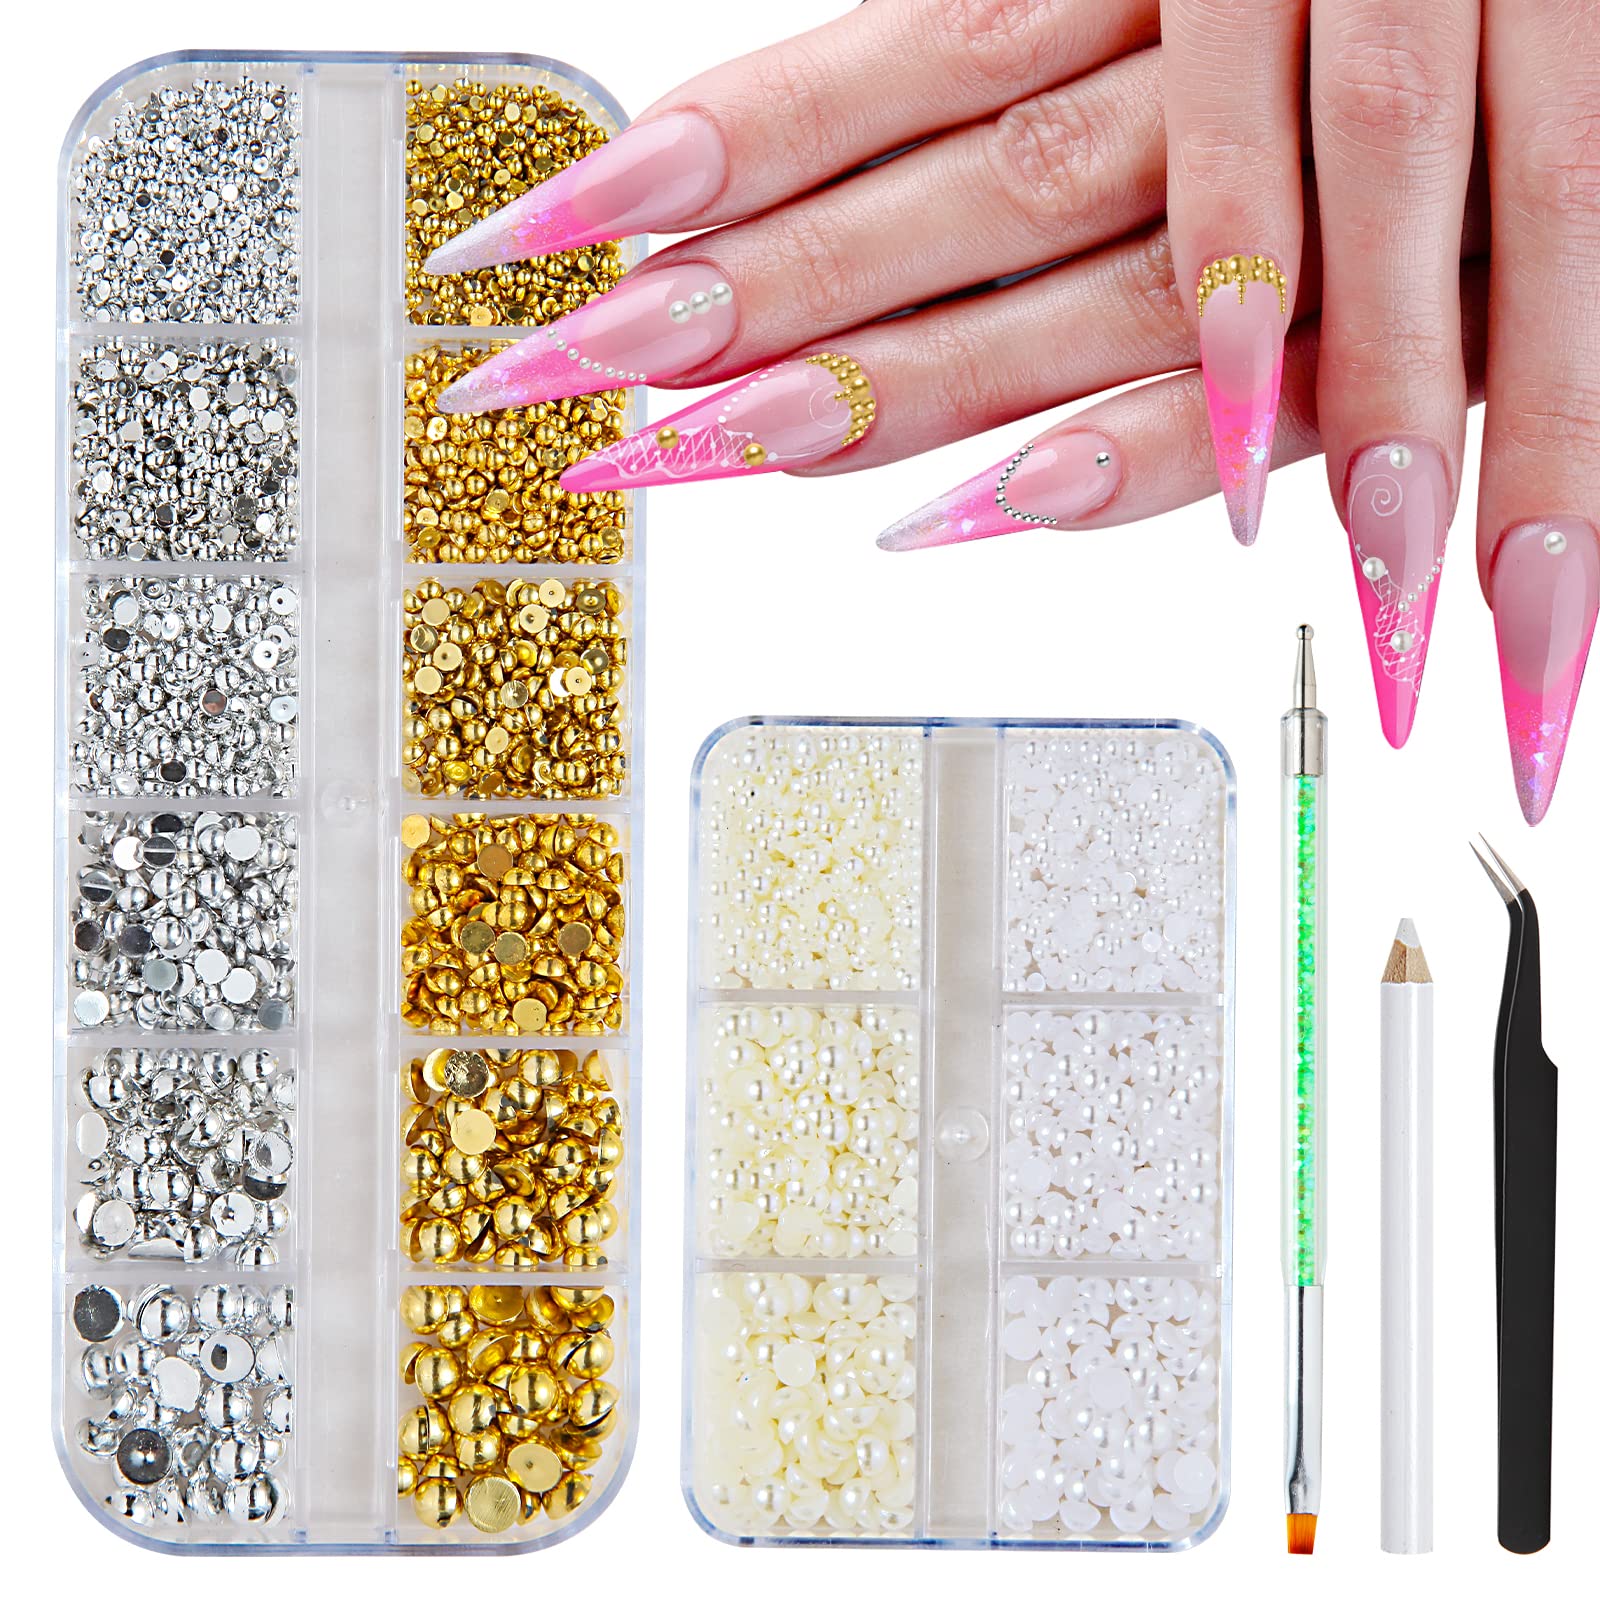 5600 PCS 7 Sizes Flatback Nail Pearls Flat Pearls for Crafts Nails Art  Crafting